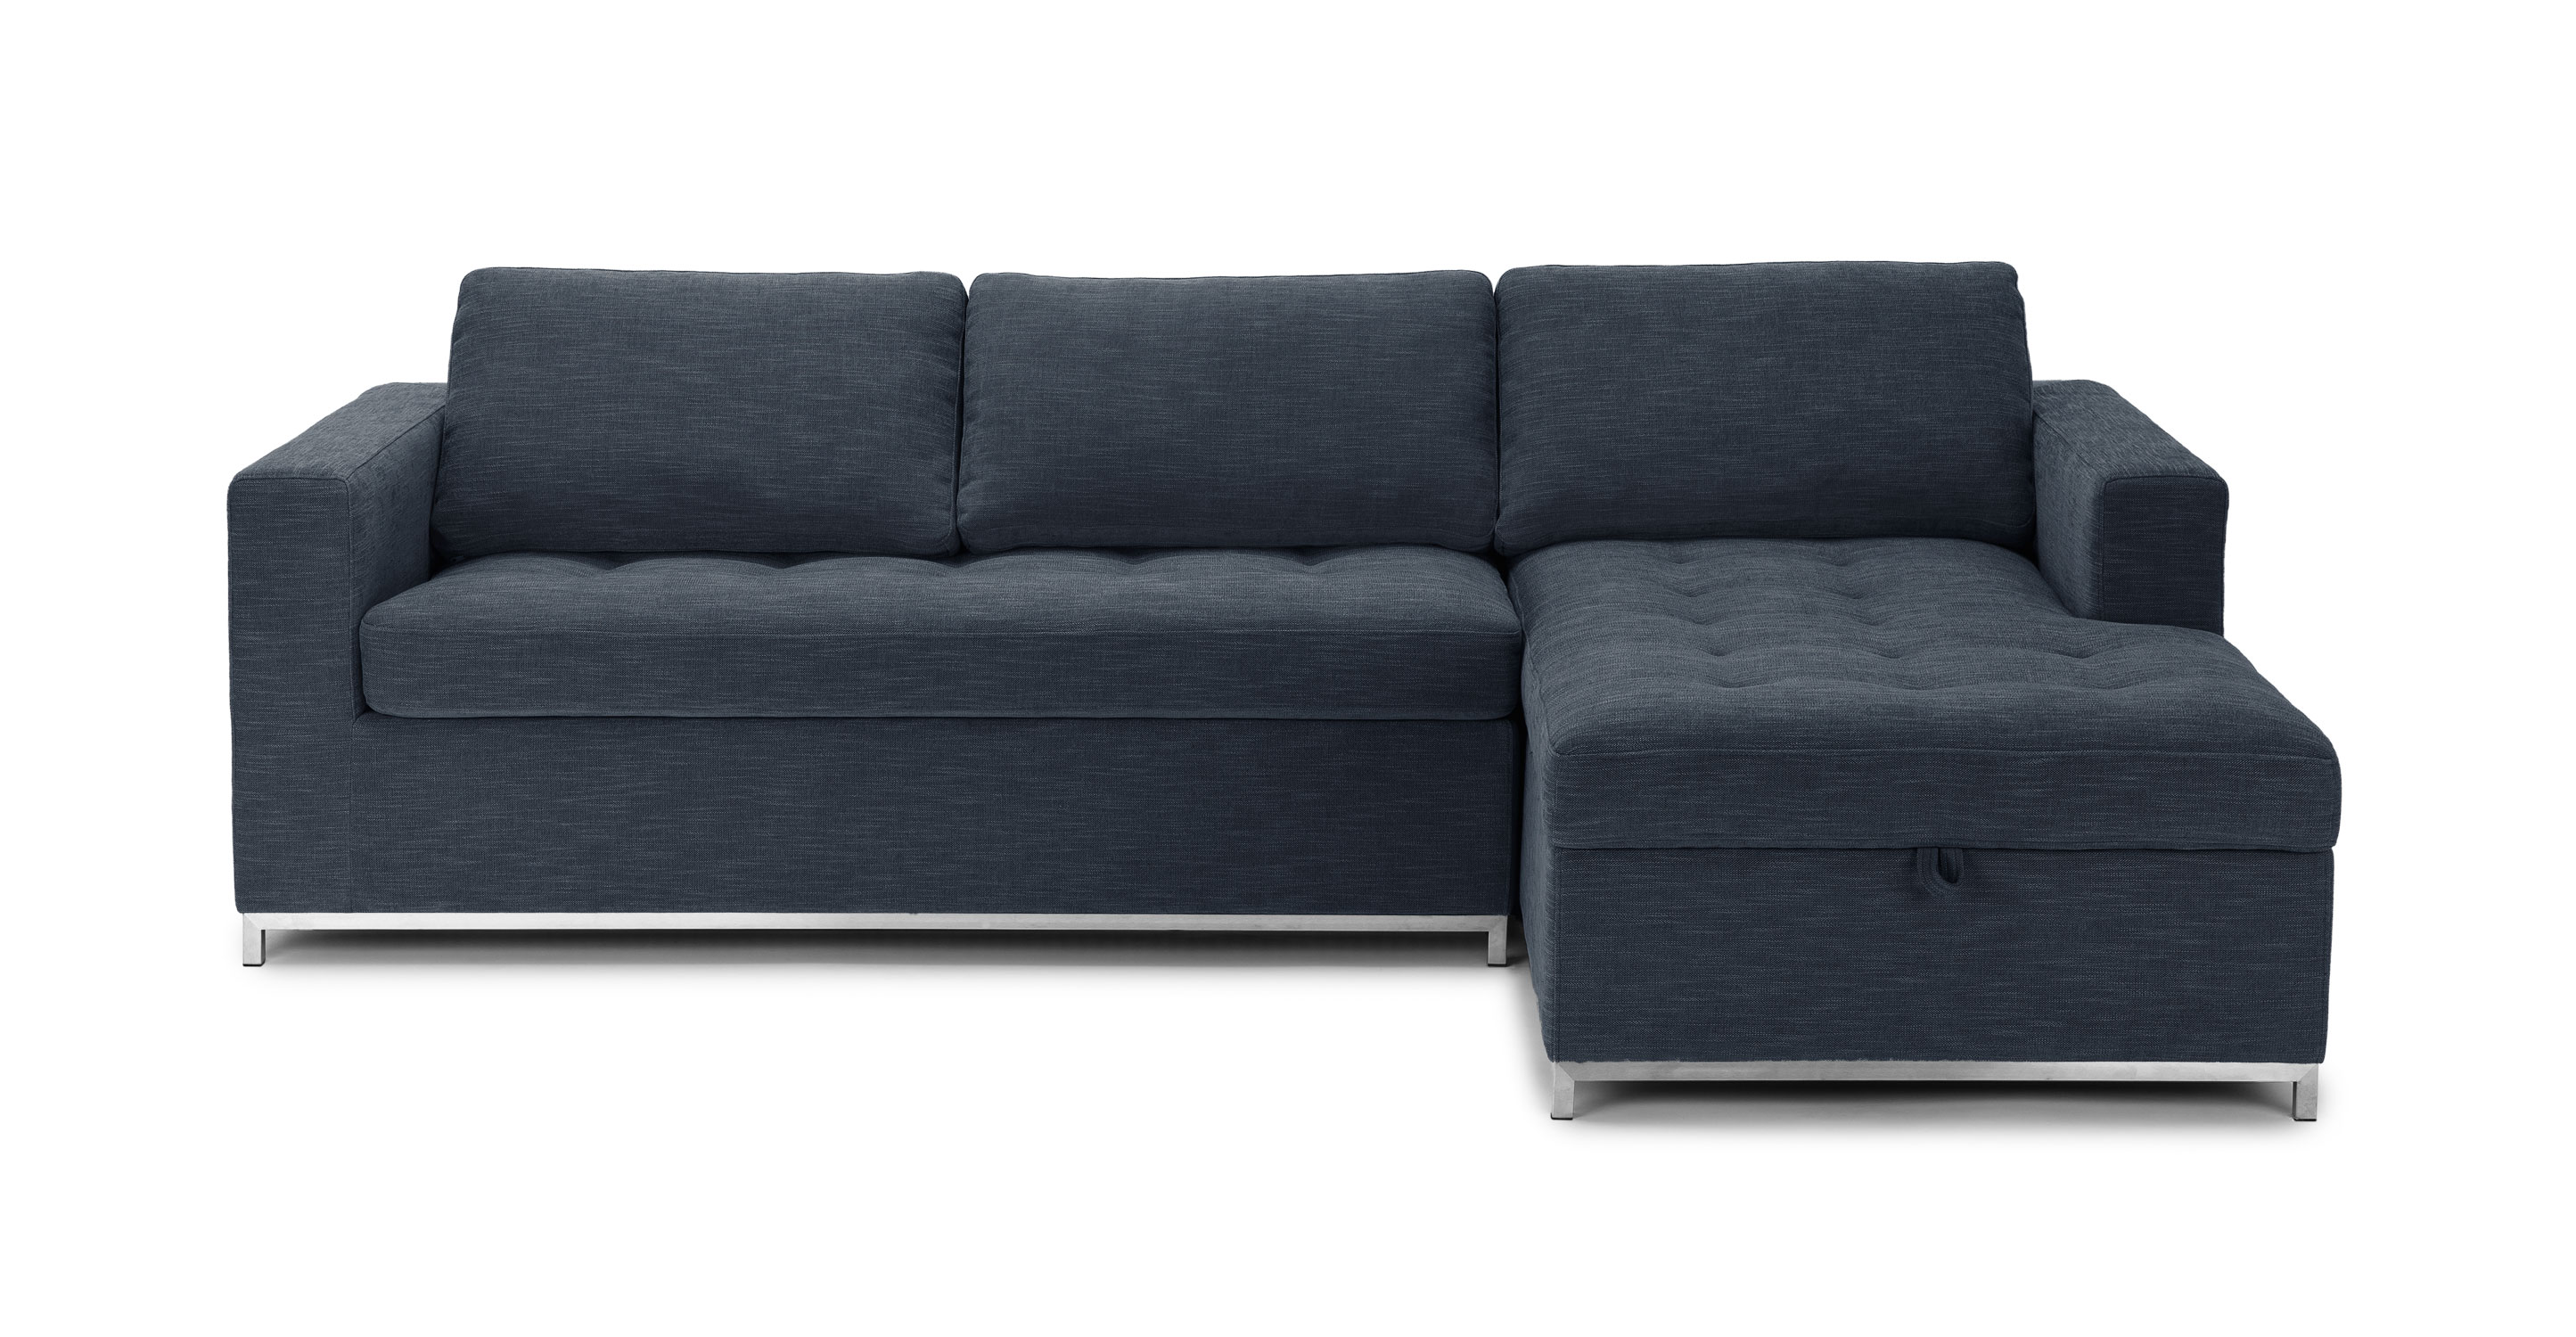 soma dawn gray right sofa bed - sectionals - article | modern, mid-century DJXNDSY